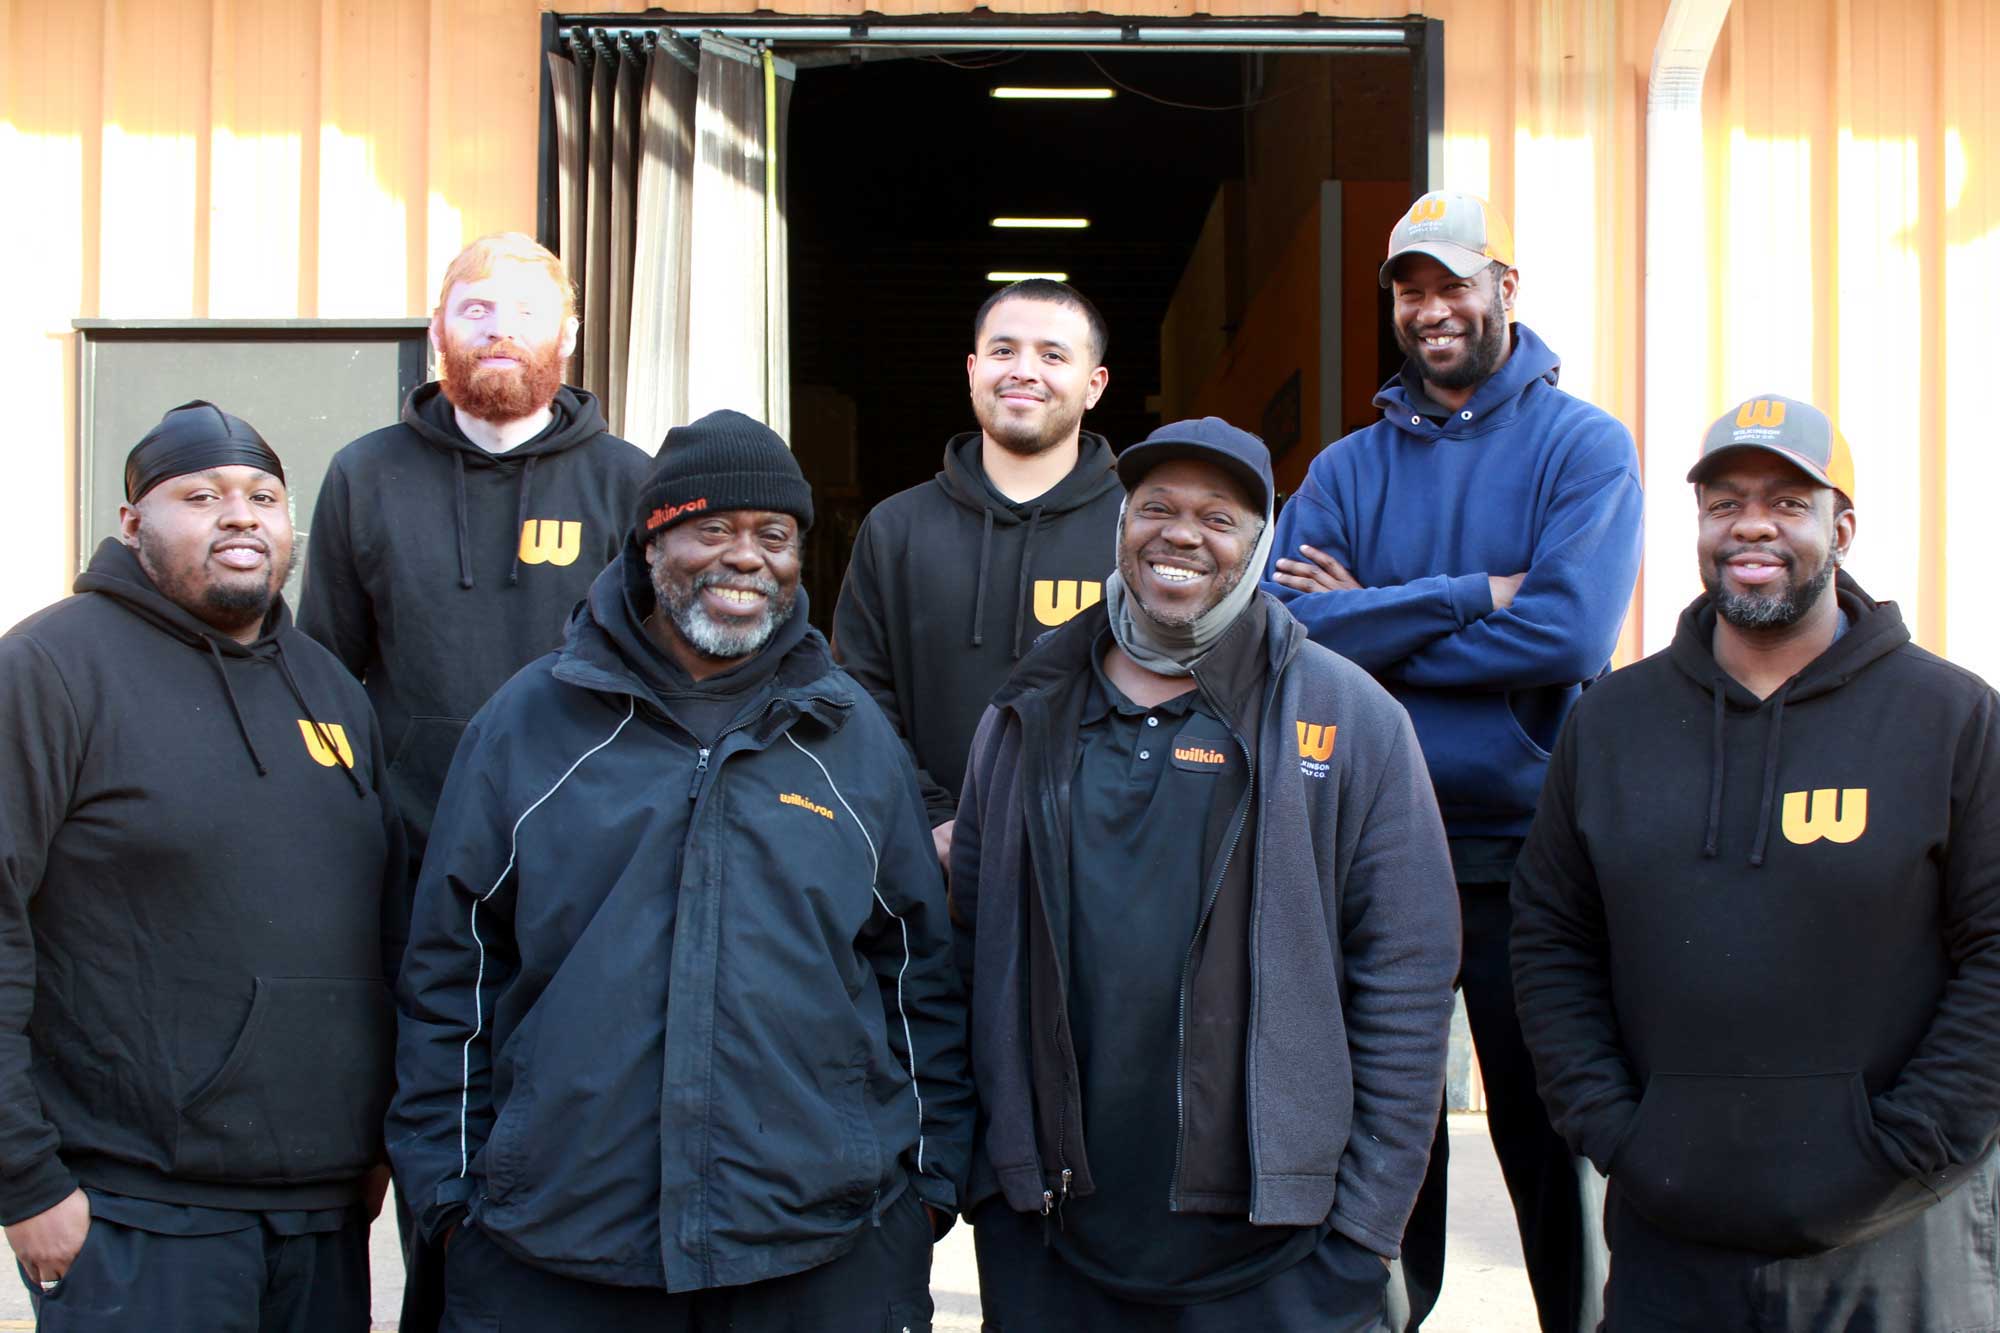 A group shot of our warehouse employees